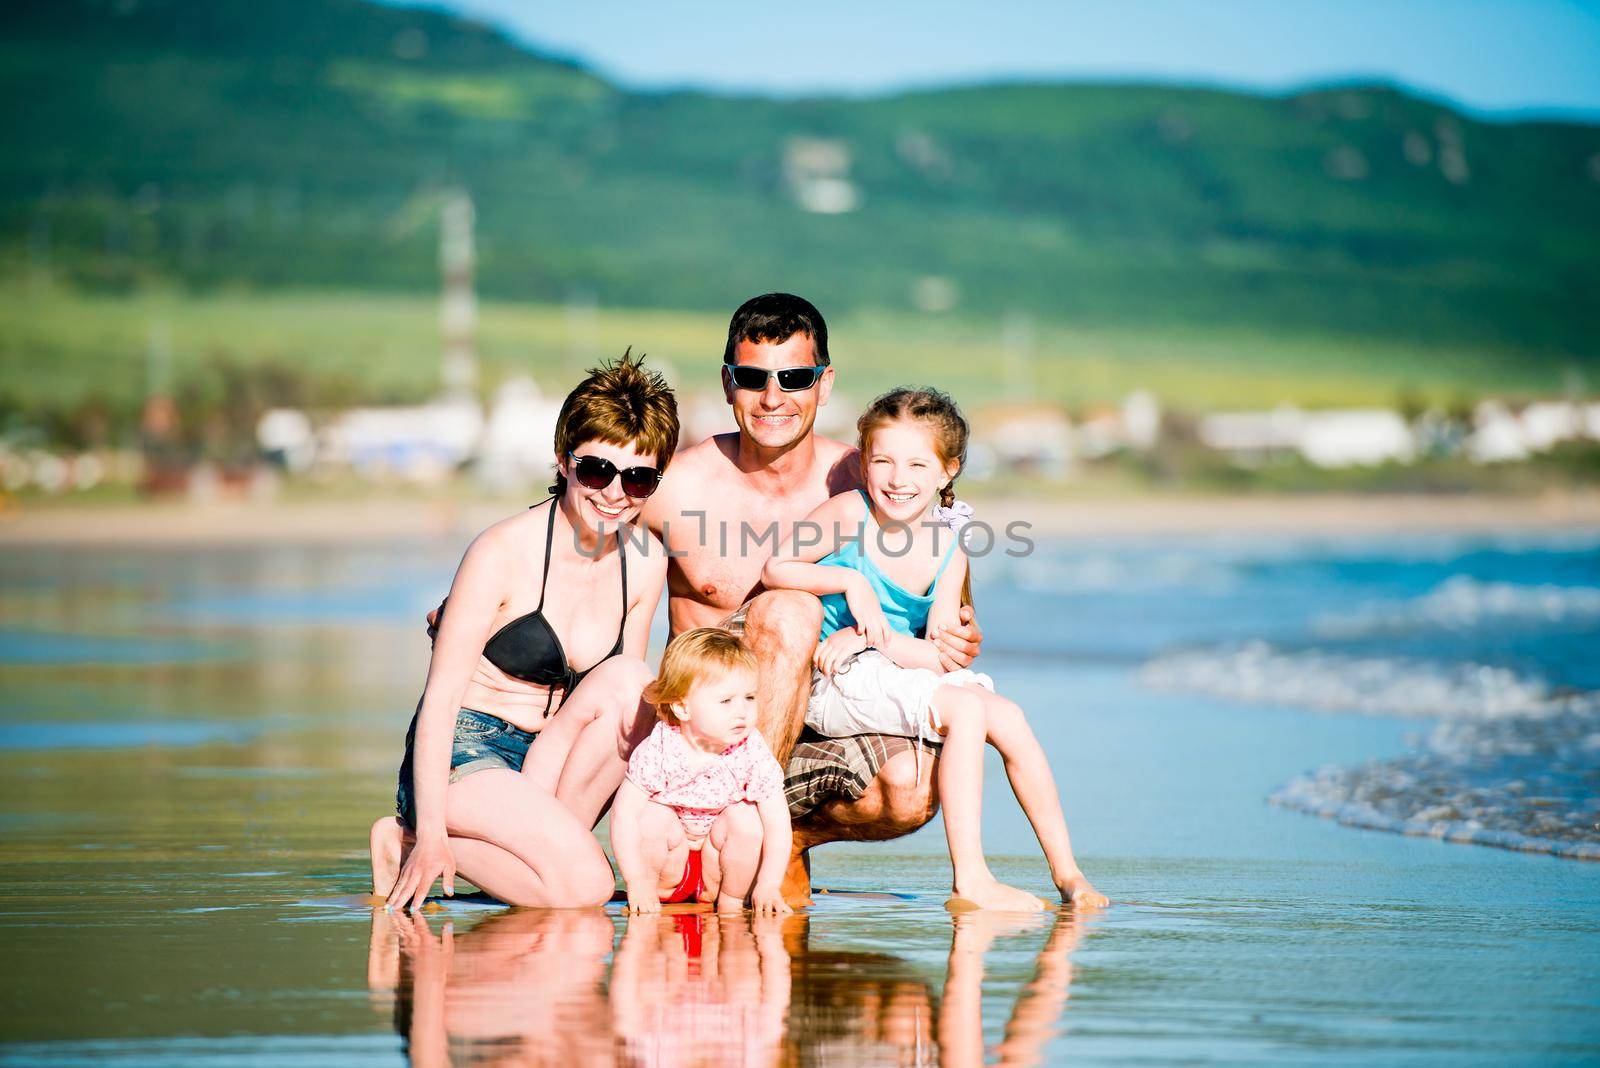 Family with two daughters having fun at the beach